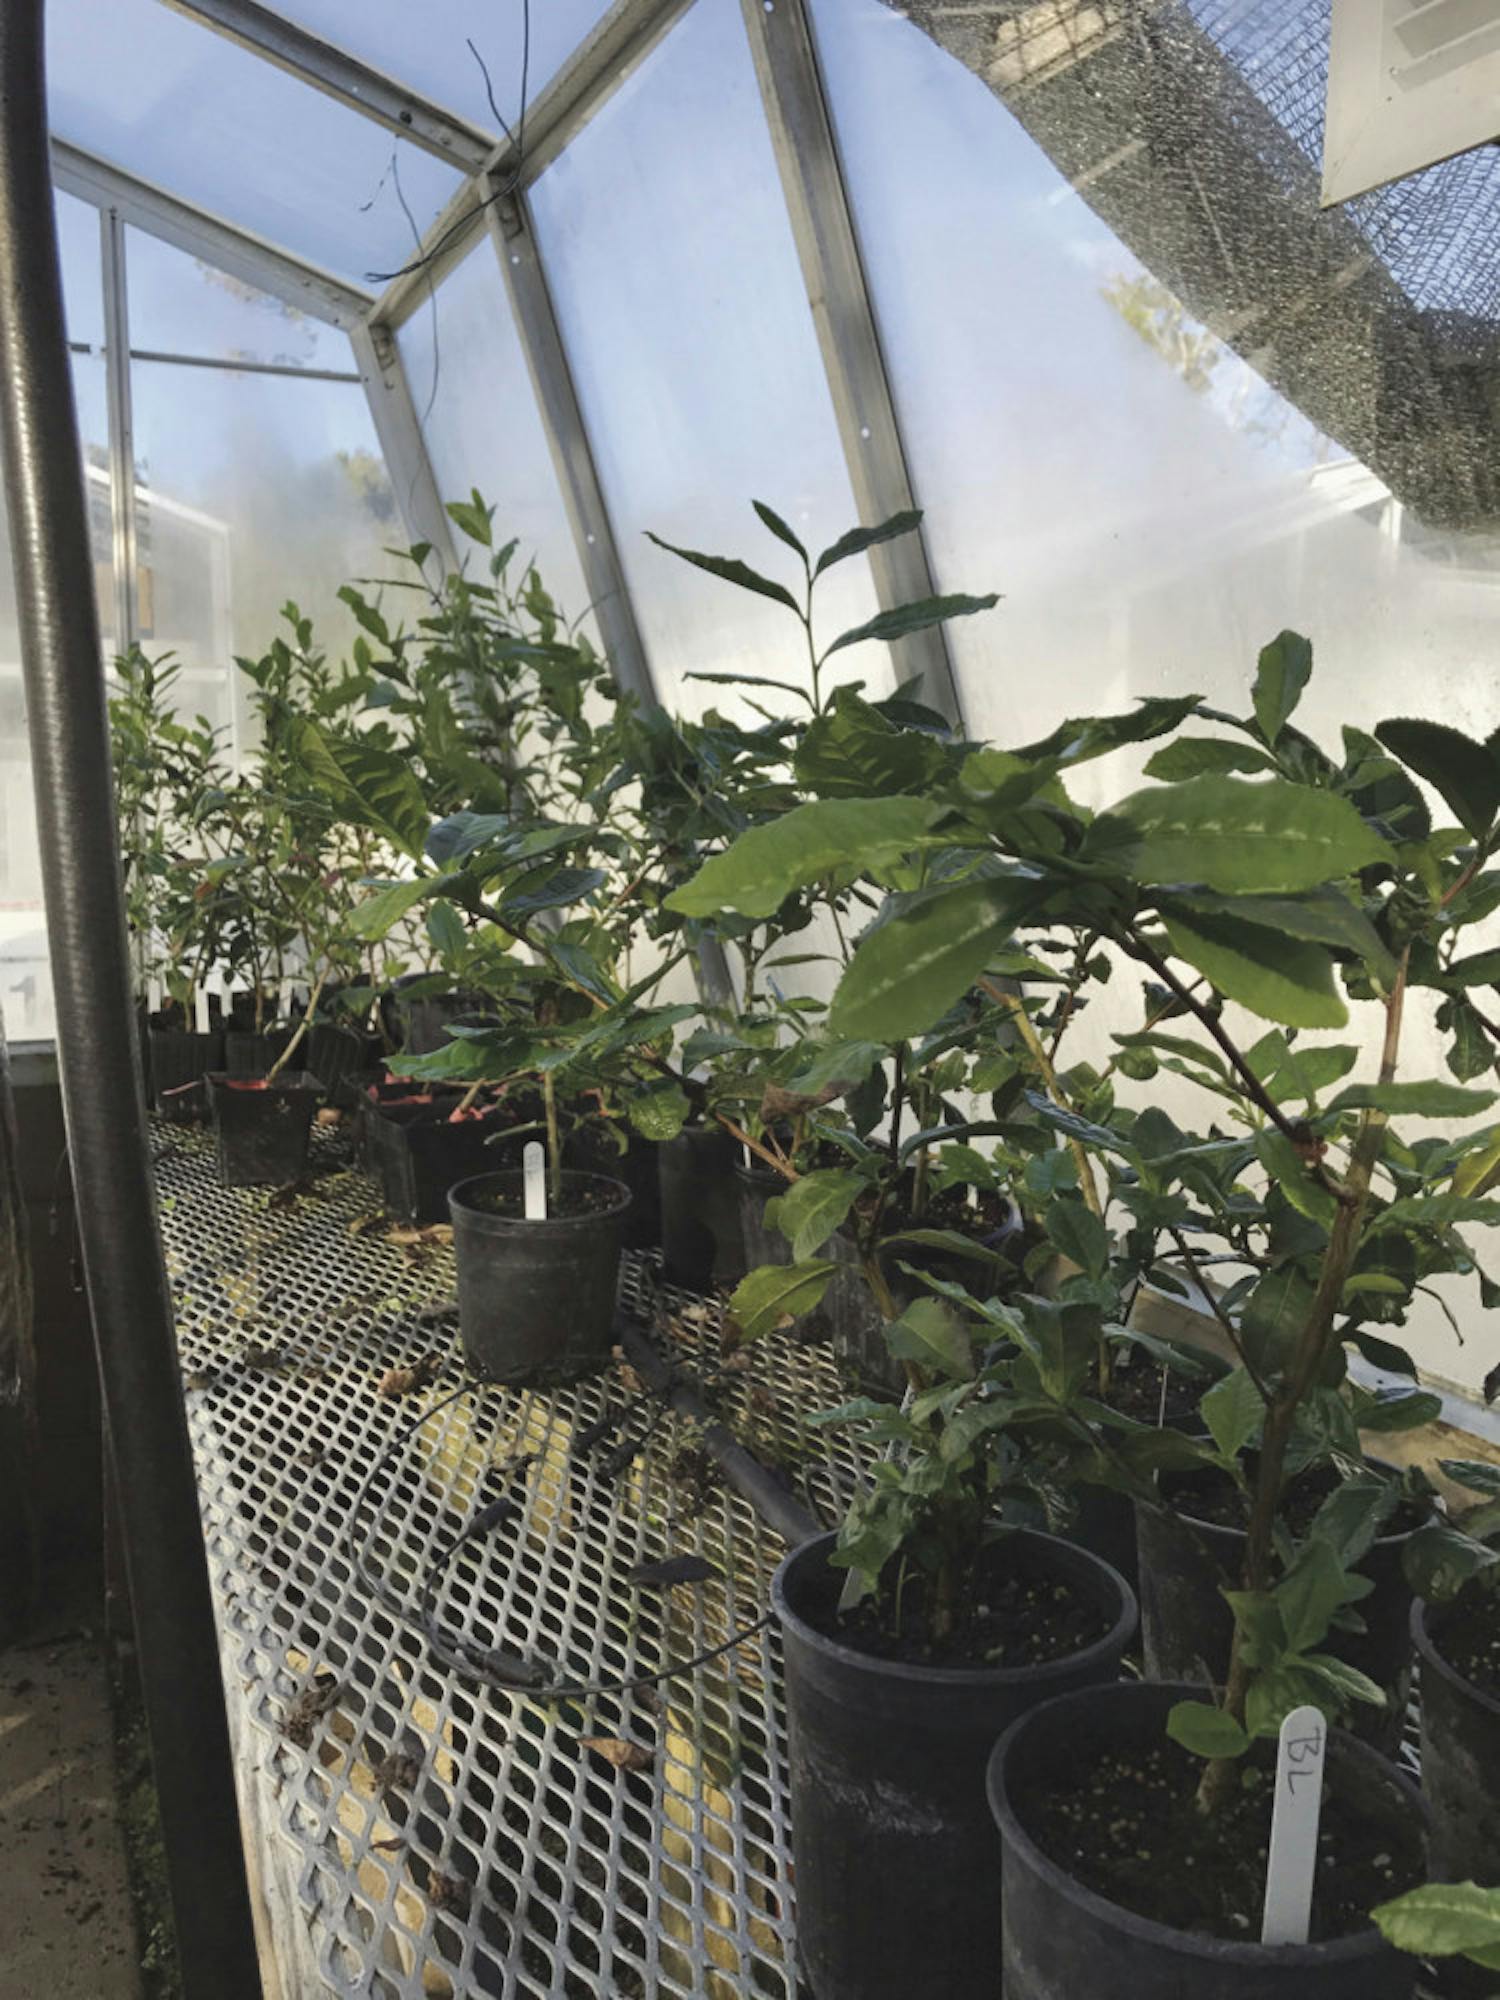 Researchers are growing potted camellias to determine if tea could be used as an alternative to Florida's citrus crop.